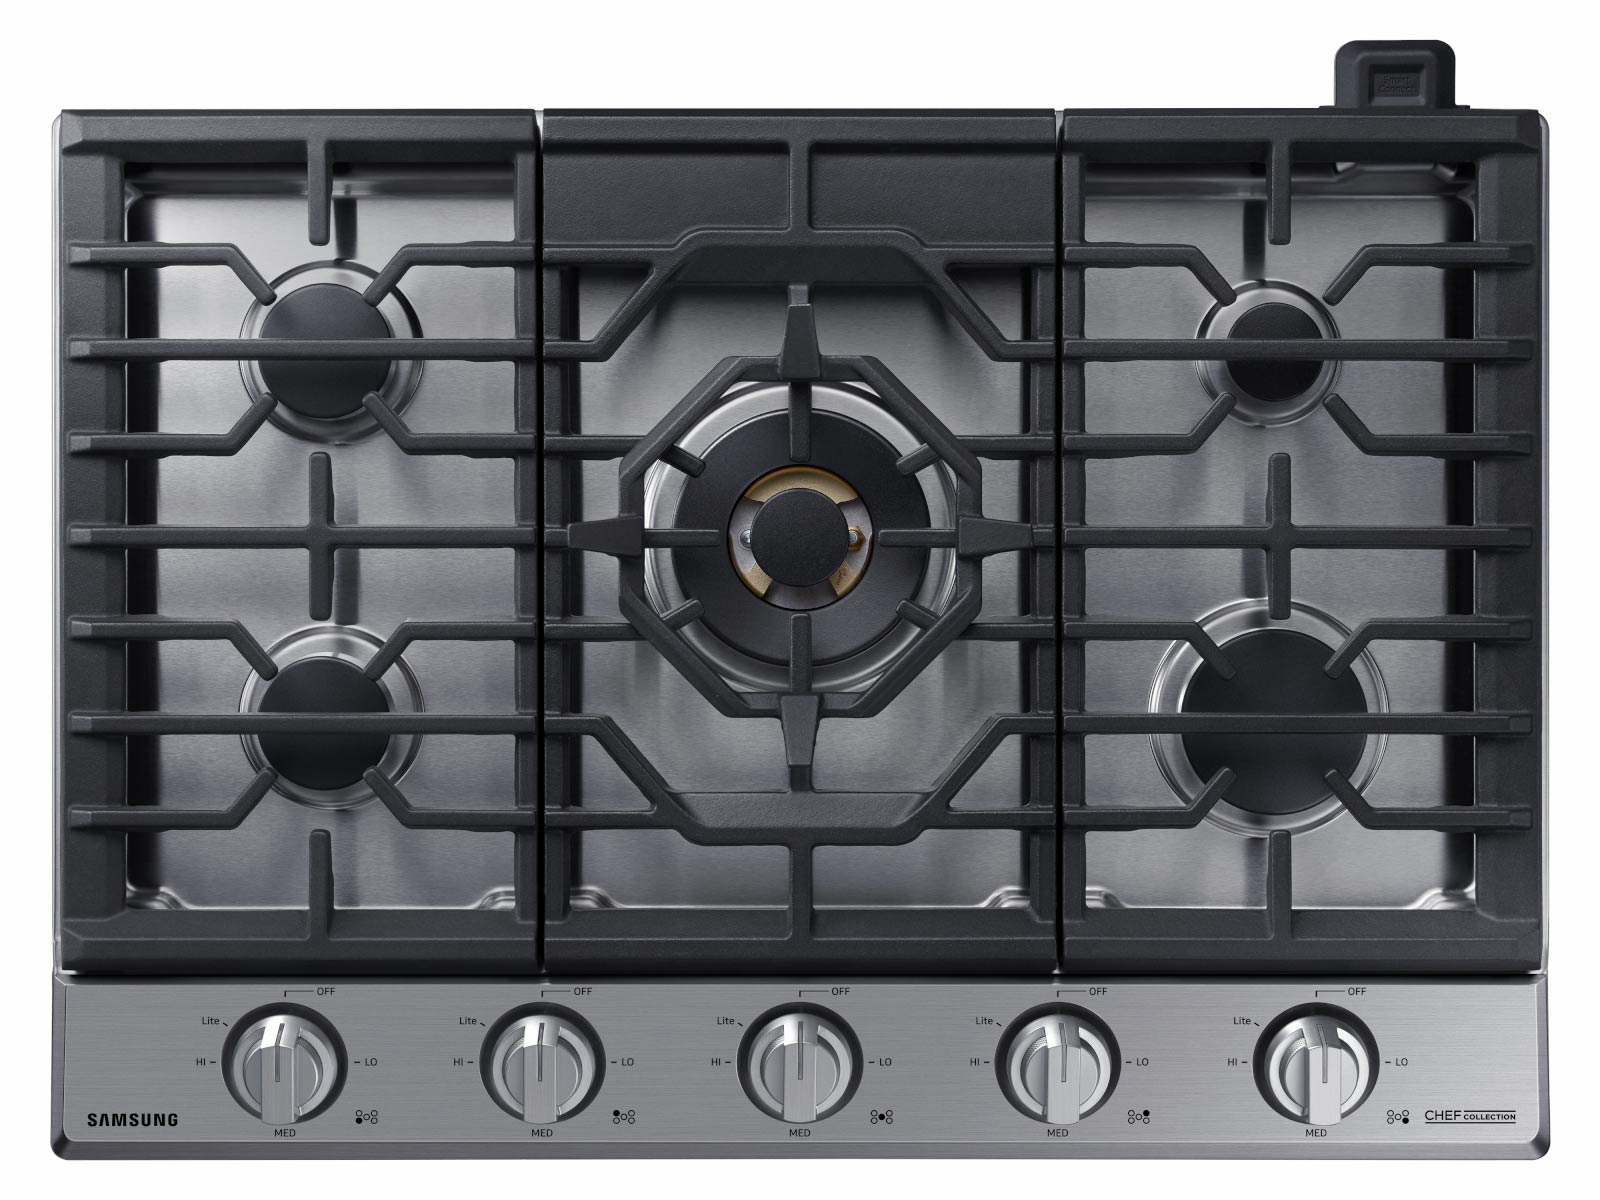 https://image-us.samsung.com/SamsungUS/home/home-appliances/cooktops-and-hoods/gas/pd/na30m9750ts/gallery-1/07_Cooktop_Gas_CC_NA30M9750TS_Top_View_Wok_Grate_Silver.jpg?$product-details-jpg$